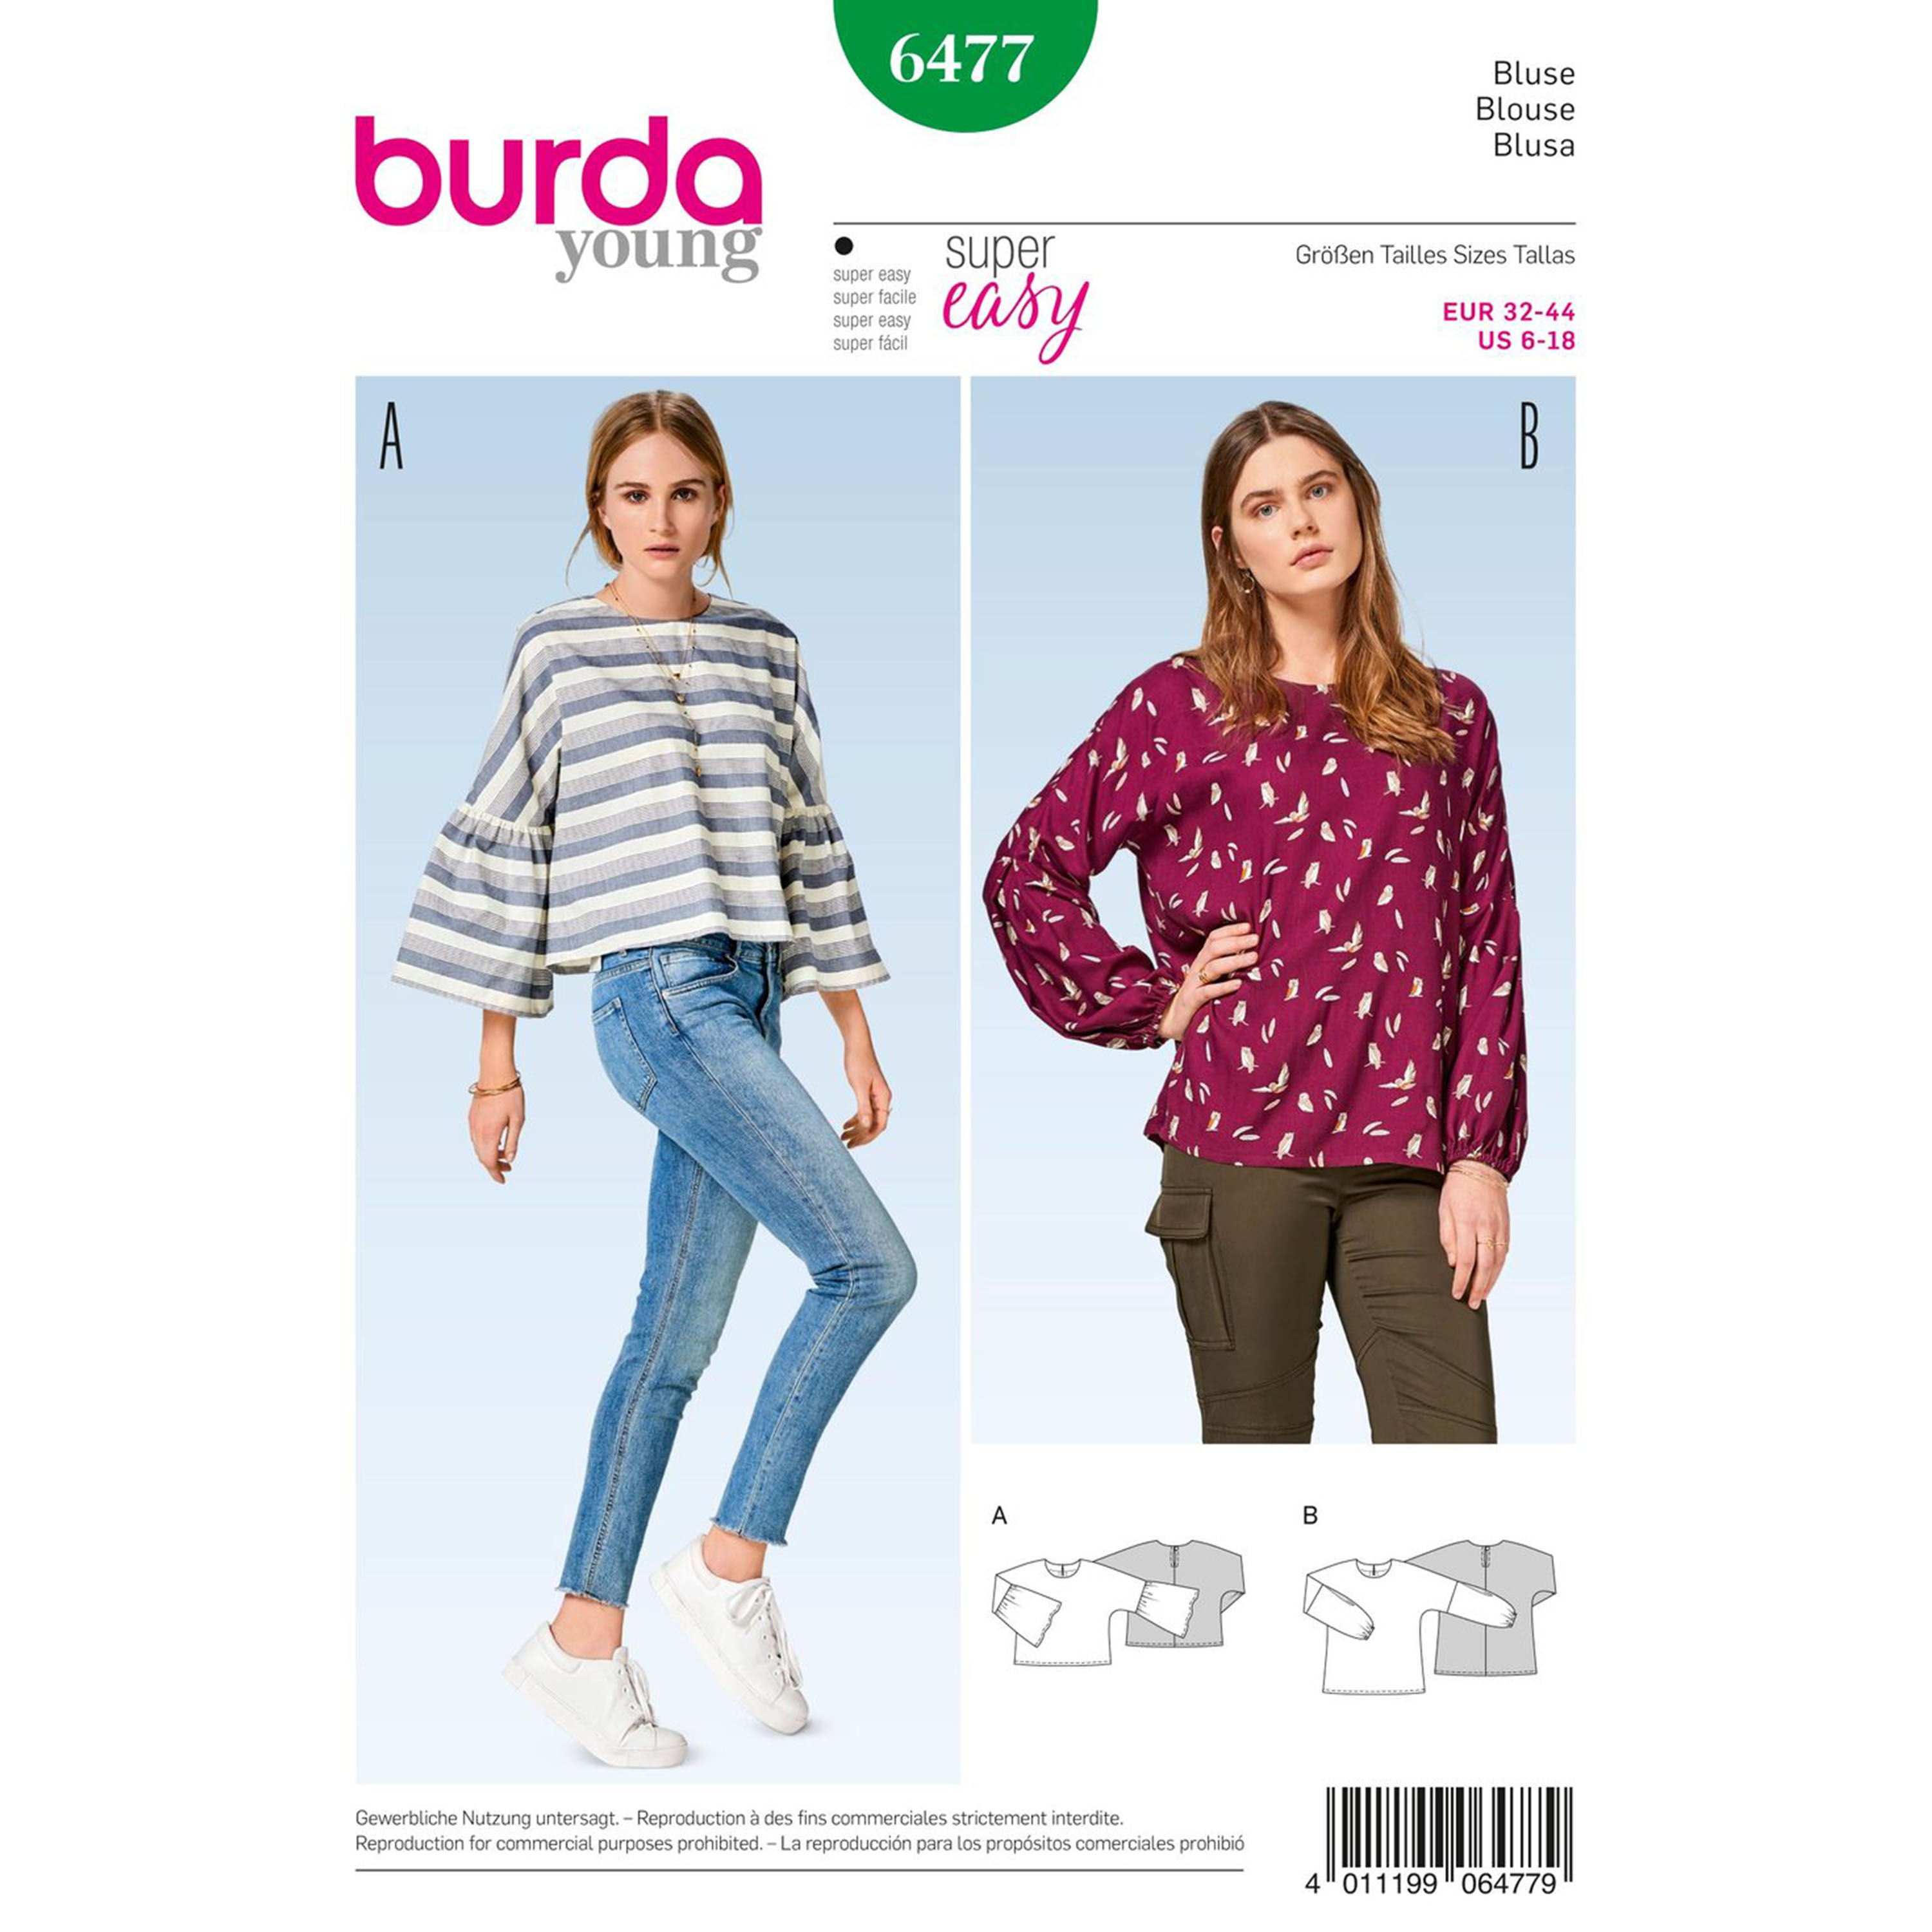 Burda Style - 6 Months | 6 Issues Subscription